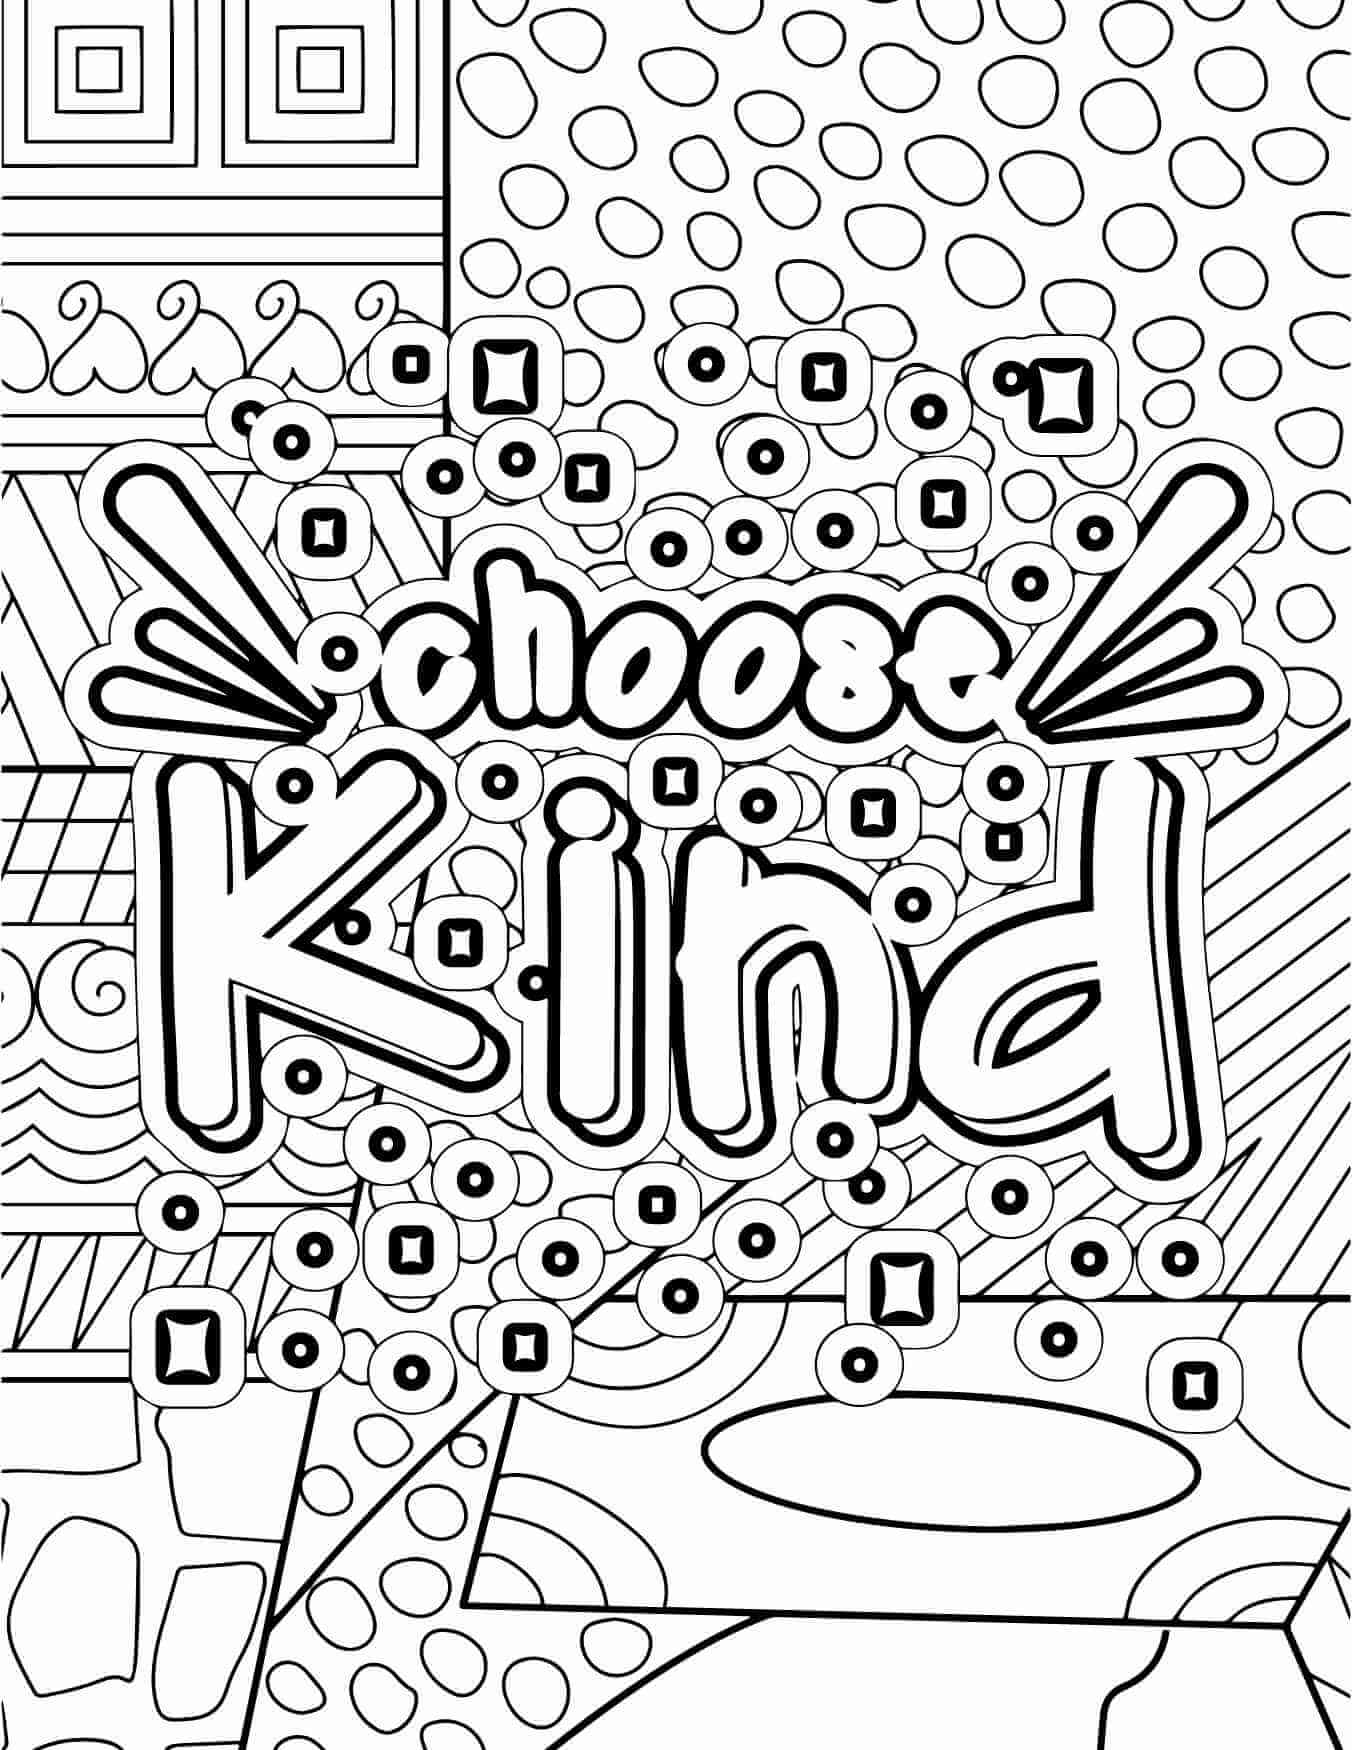 A funky coloring page with geometric shapes in the background and bubble letters that read "choose kind." 